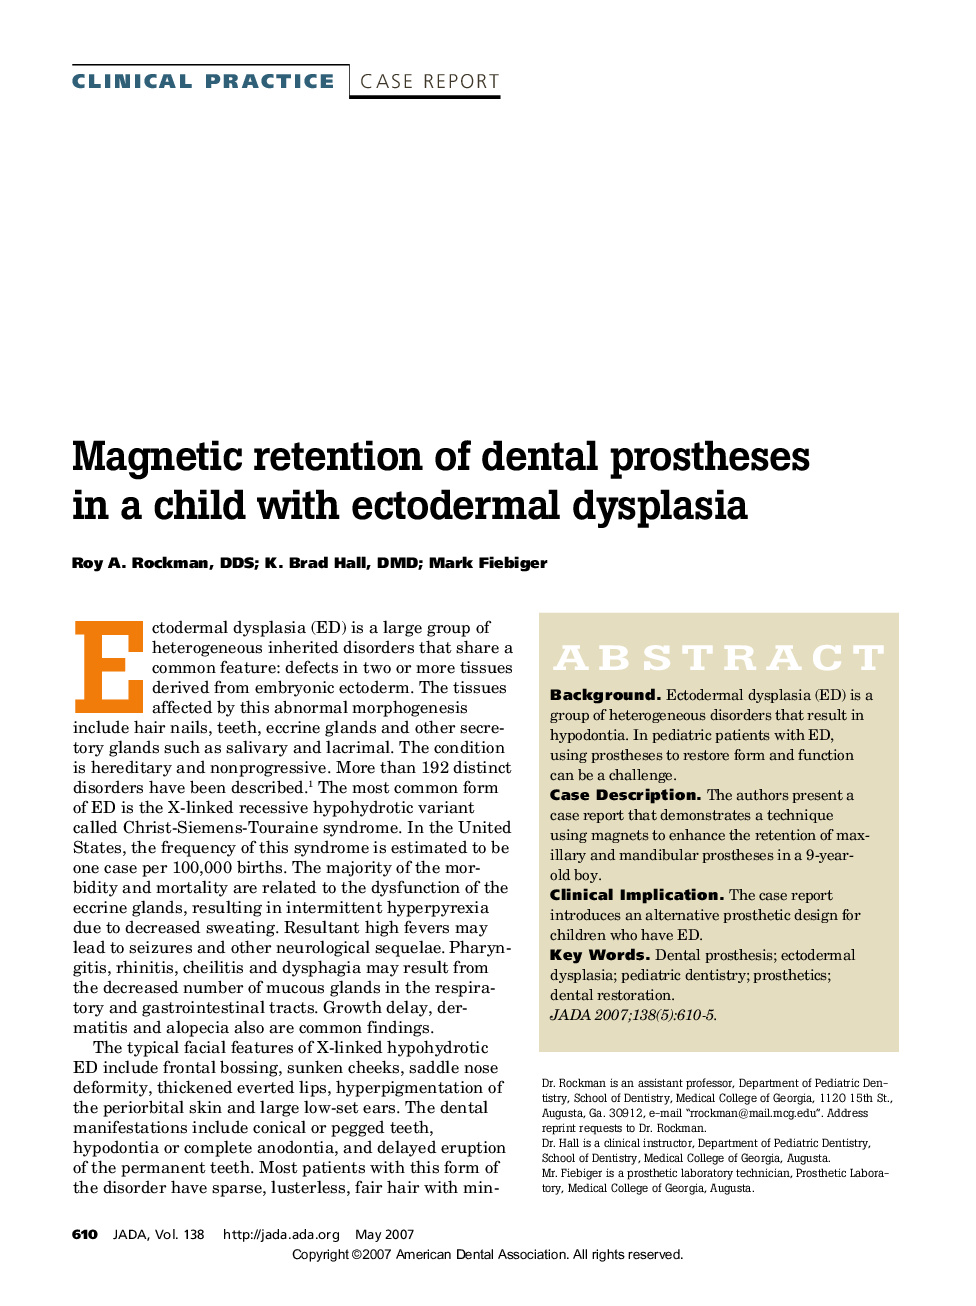 Magnetic retention of dental prostheses in a child with ectodermal dysplasia